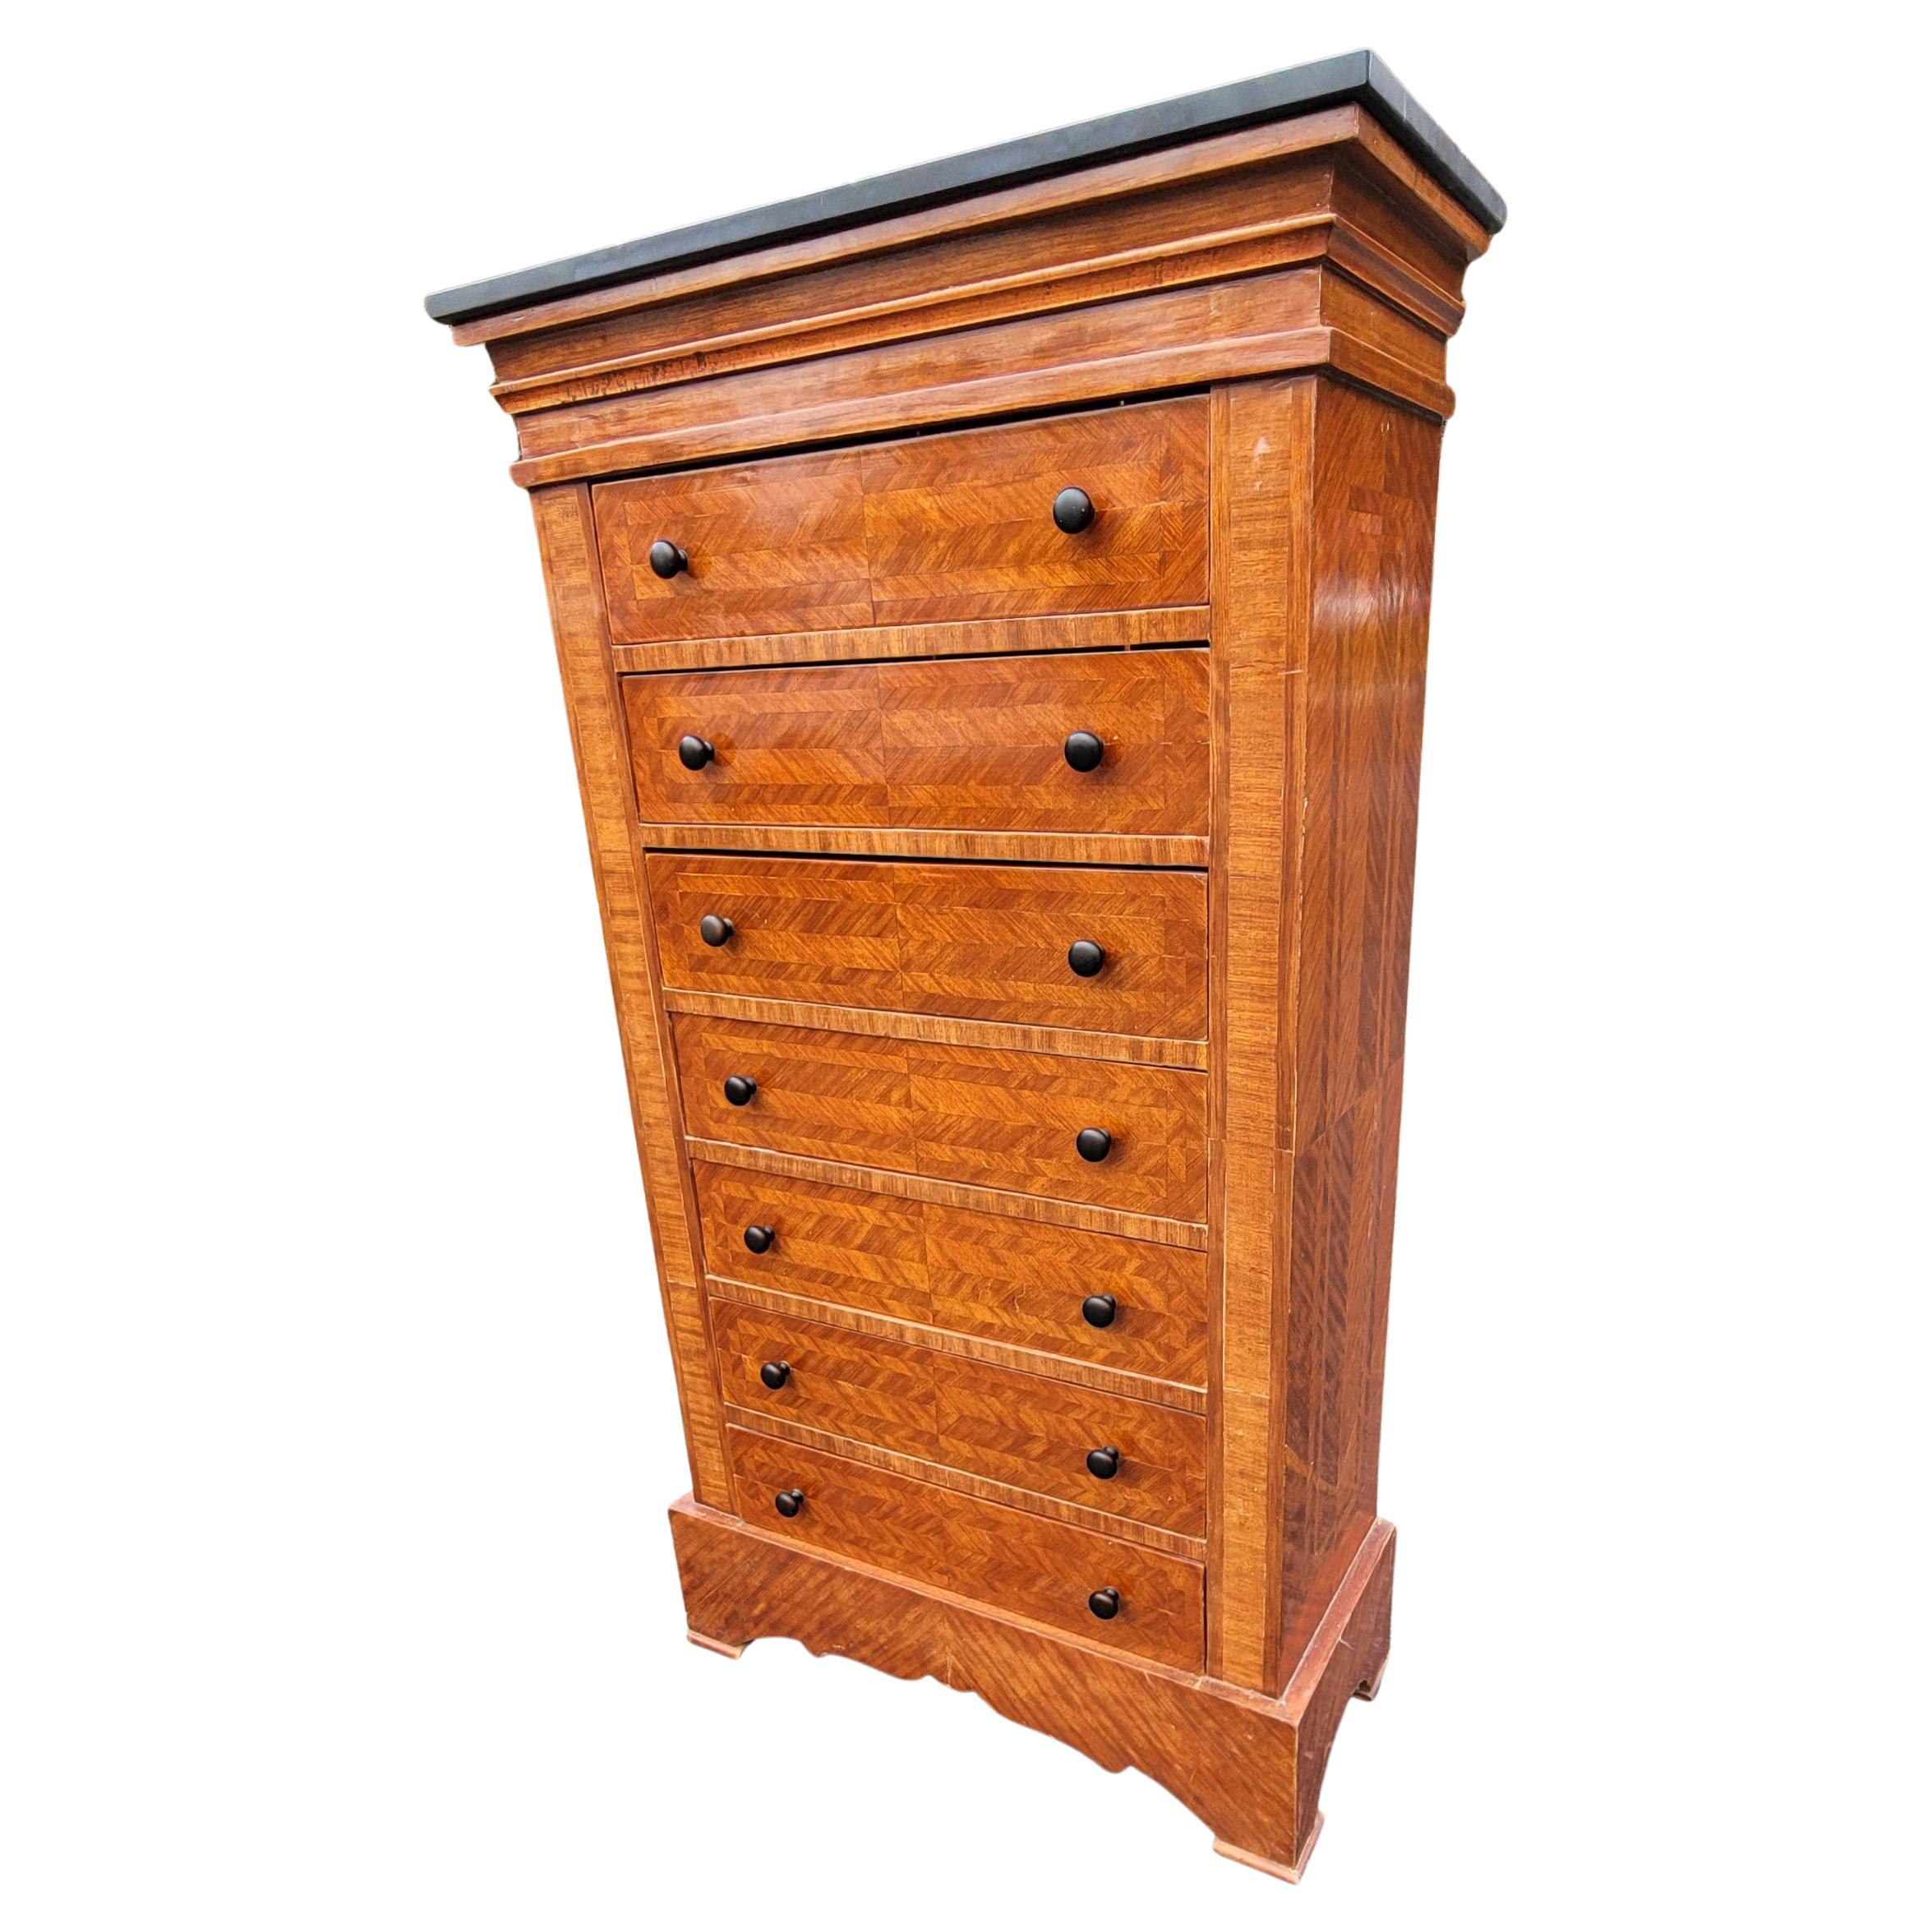 A George III style Parquetry Mahogany, walnut and pine Seven-Drawer Chest with removable stone Top. Original Stone top might have been replaced, along with drawers pulls.
Very good vintage condition. Measures 32